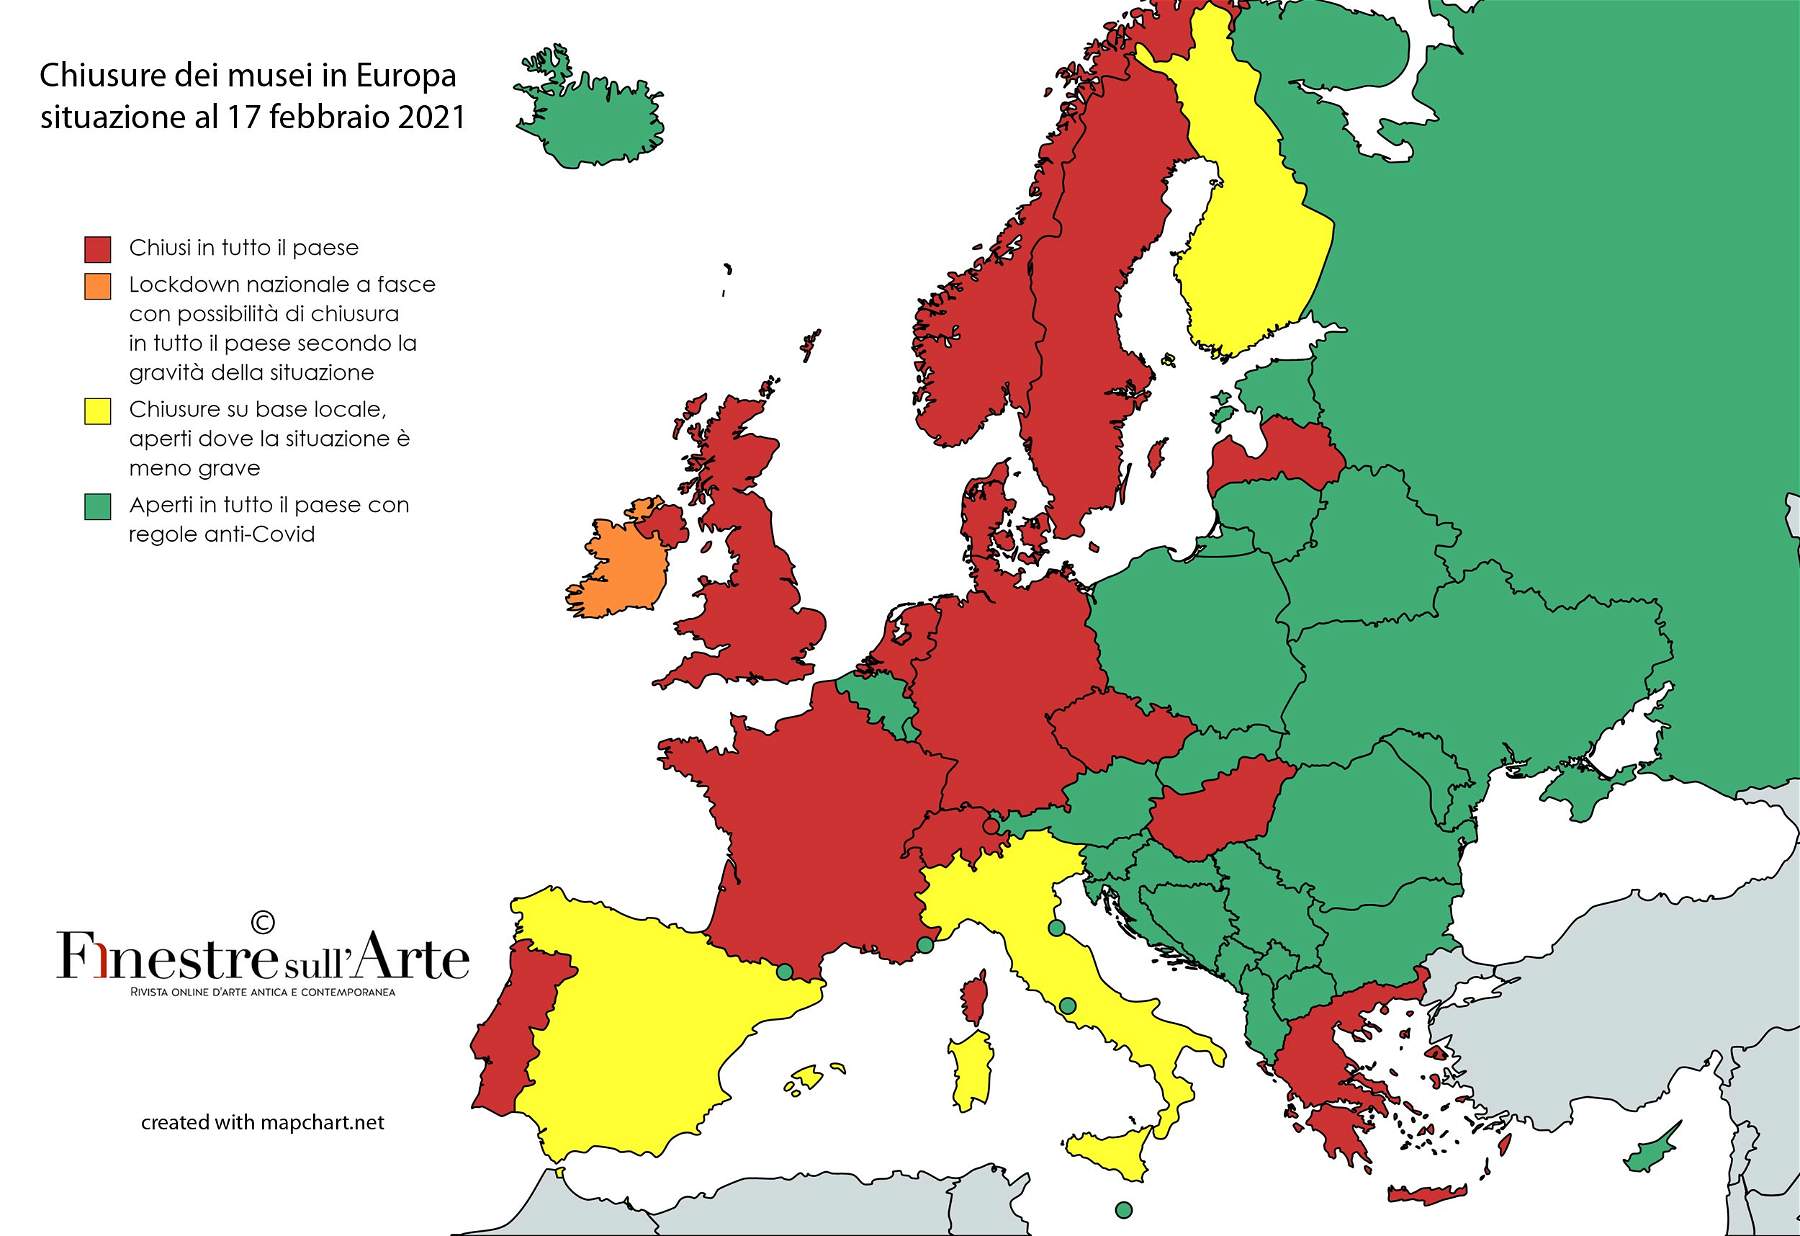 Museums, Italy among the few EU countries to keep them open. Here's where they're closed and where they're not